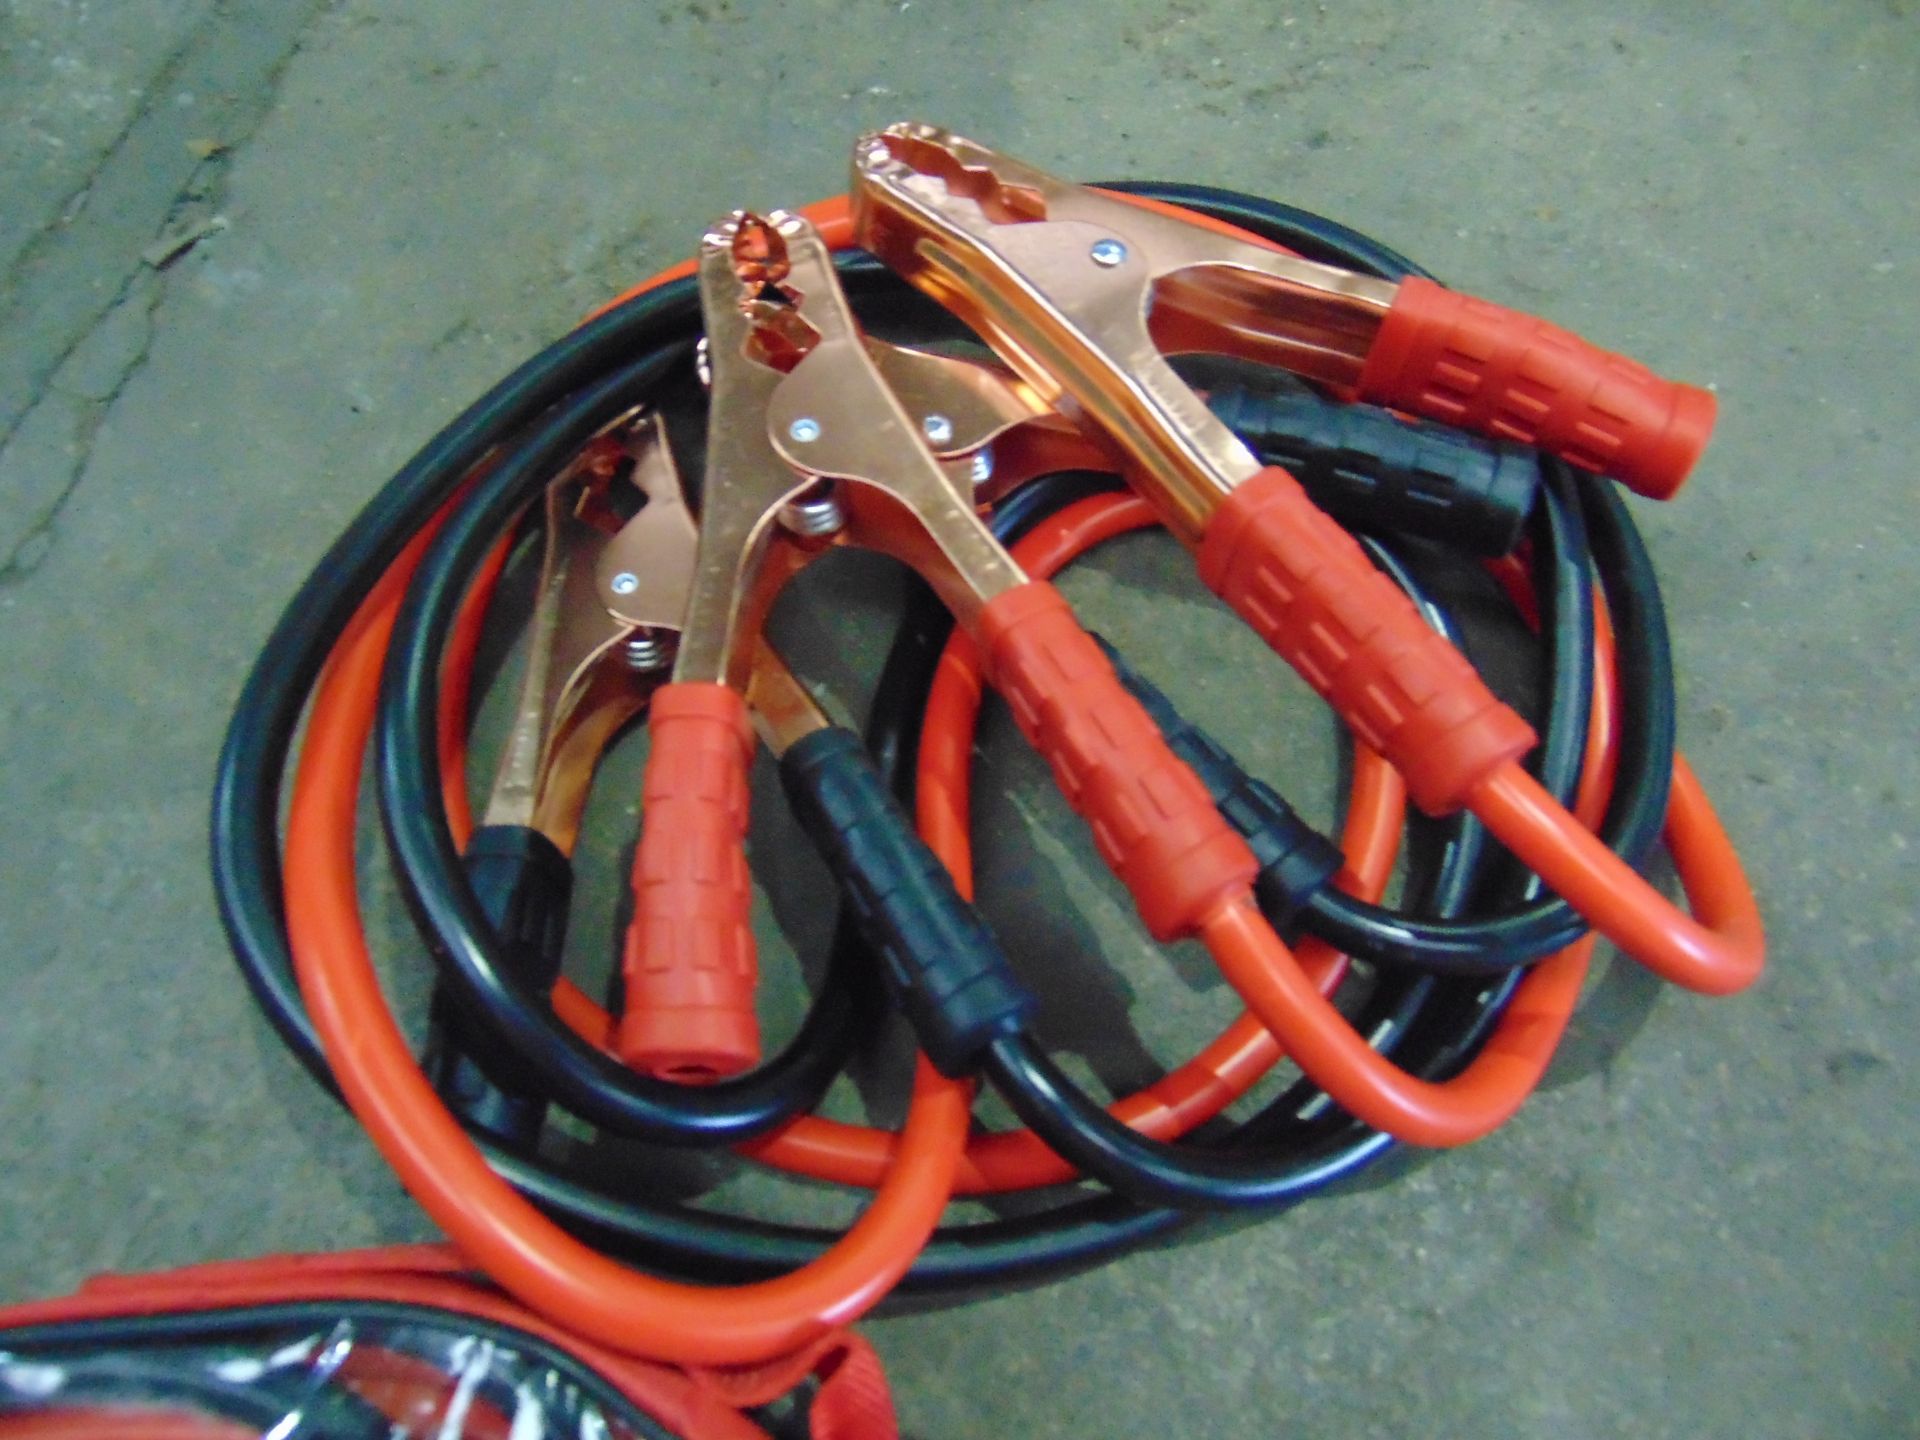 2 x UNISSUED Heavy Duty 100AMP Booster Jump Start Cable Sets - Image 3 of 3